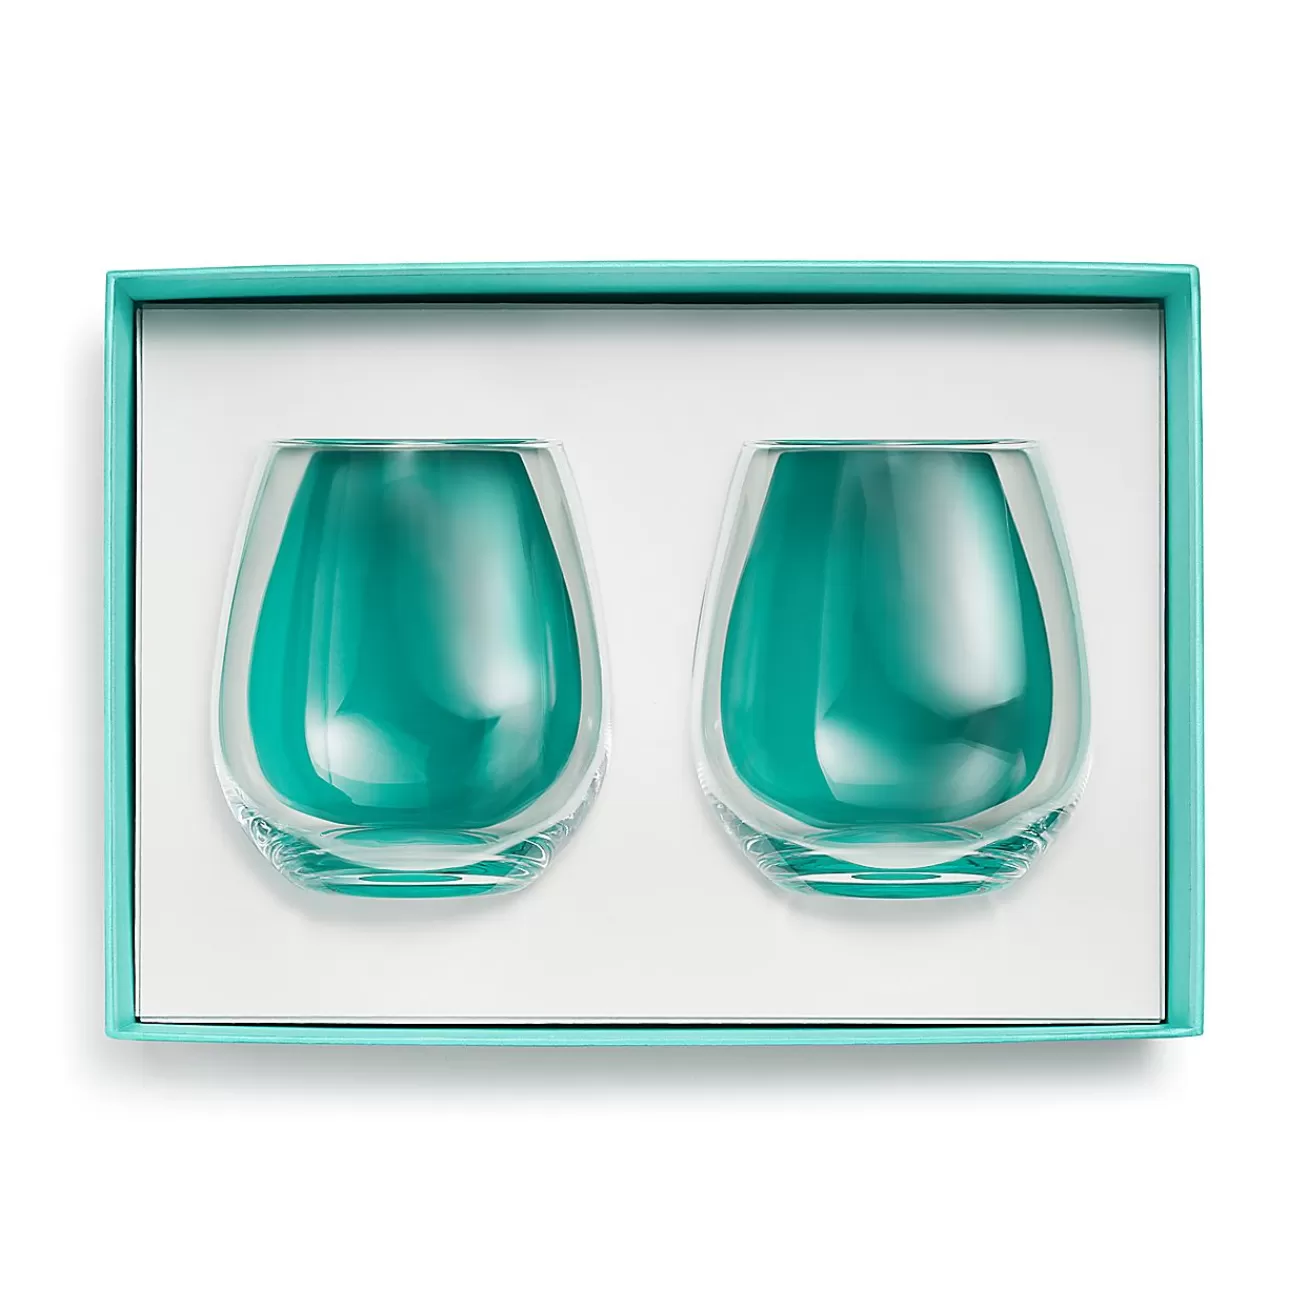 Tiffany & Co. Tiffany Home Essentials Stemless Red Wine Glasses in Crystal Glass, Set of Two | ^ The Home | Housewarming Gifts